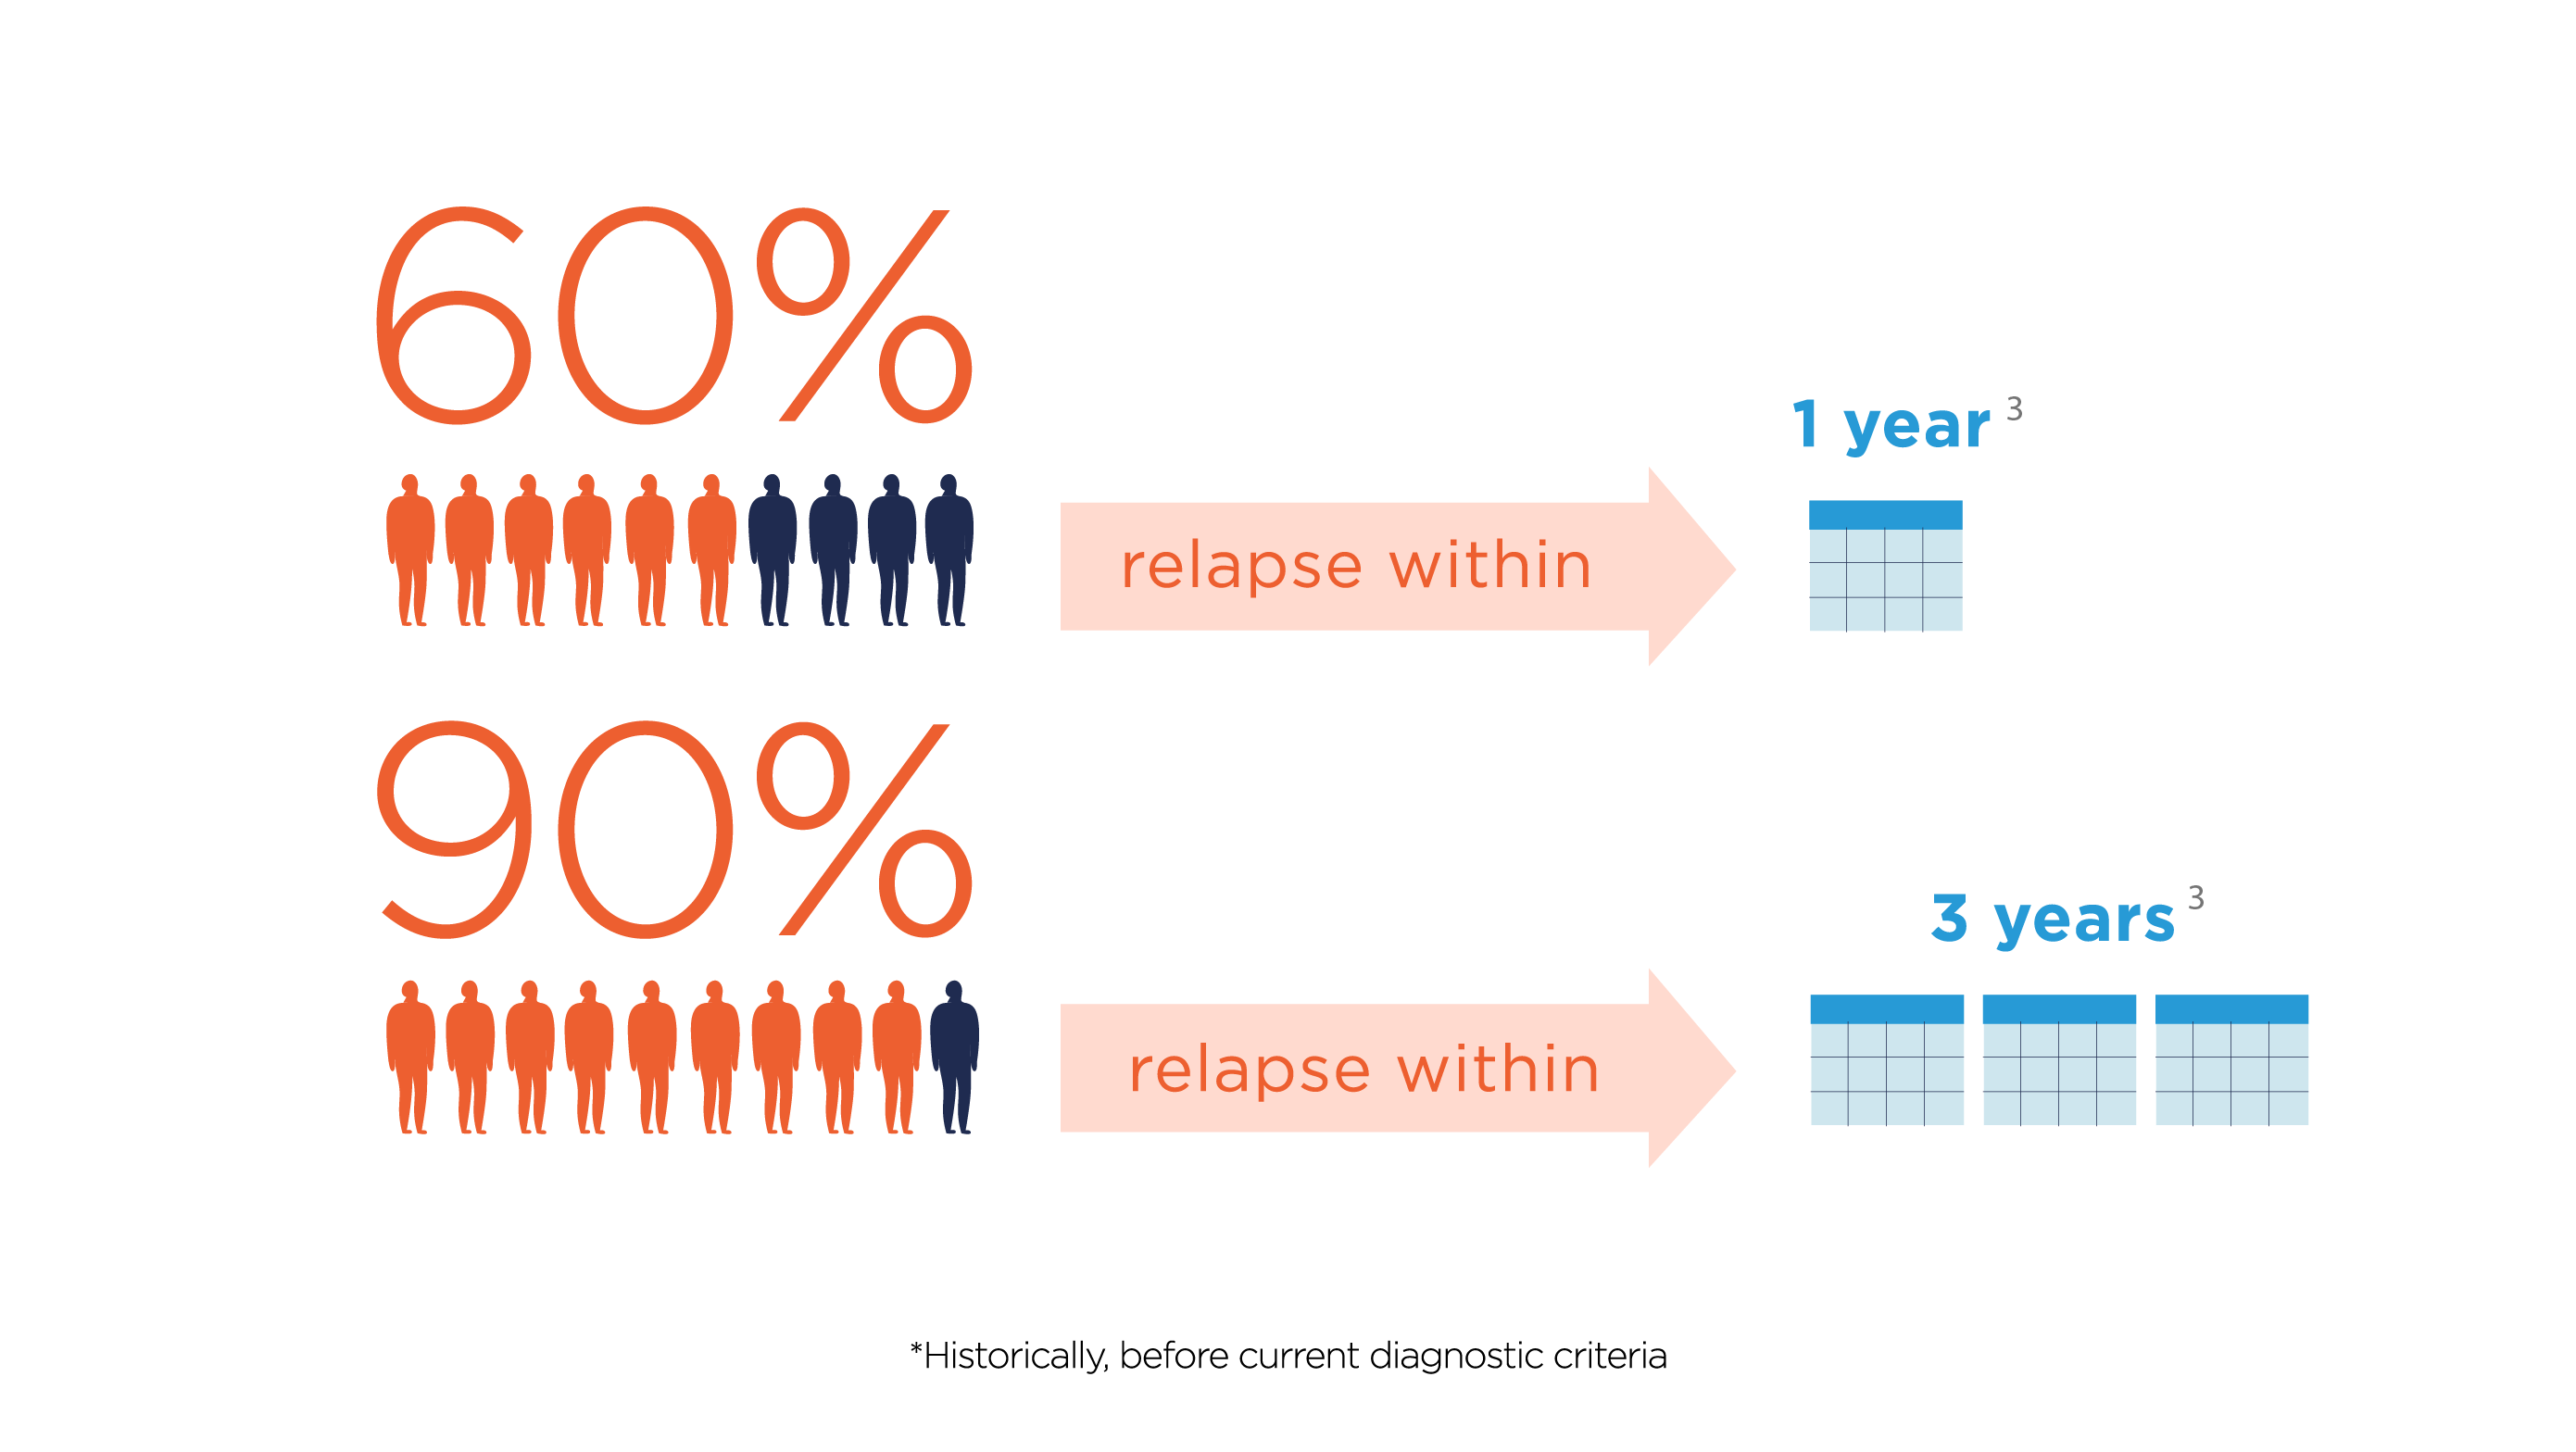 Most people with NMOSD experience sporadic, recurring relapses.<sup>2</sup> Unlike with some other autoimmune diseases, these relapses often cause symptoms to permanently worsen, thereby increasing disability.<sup>3</sup>